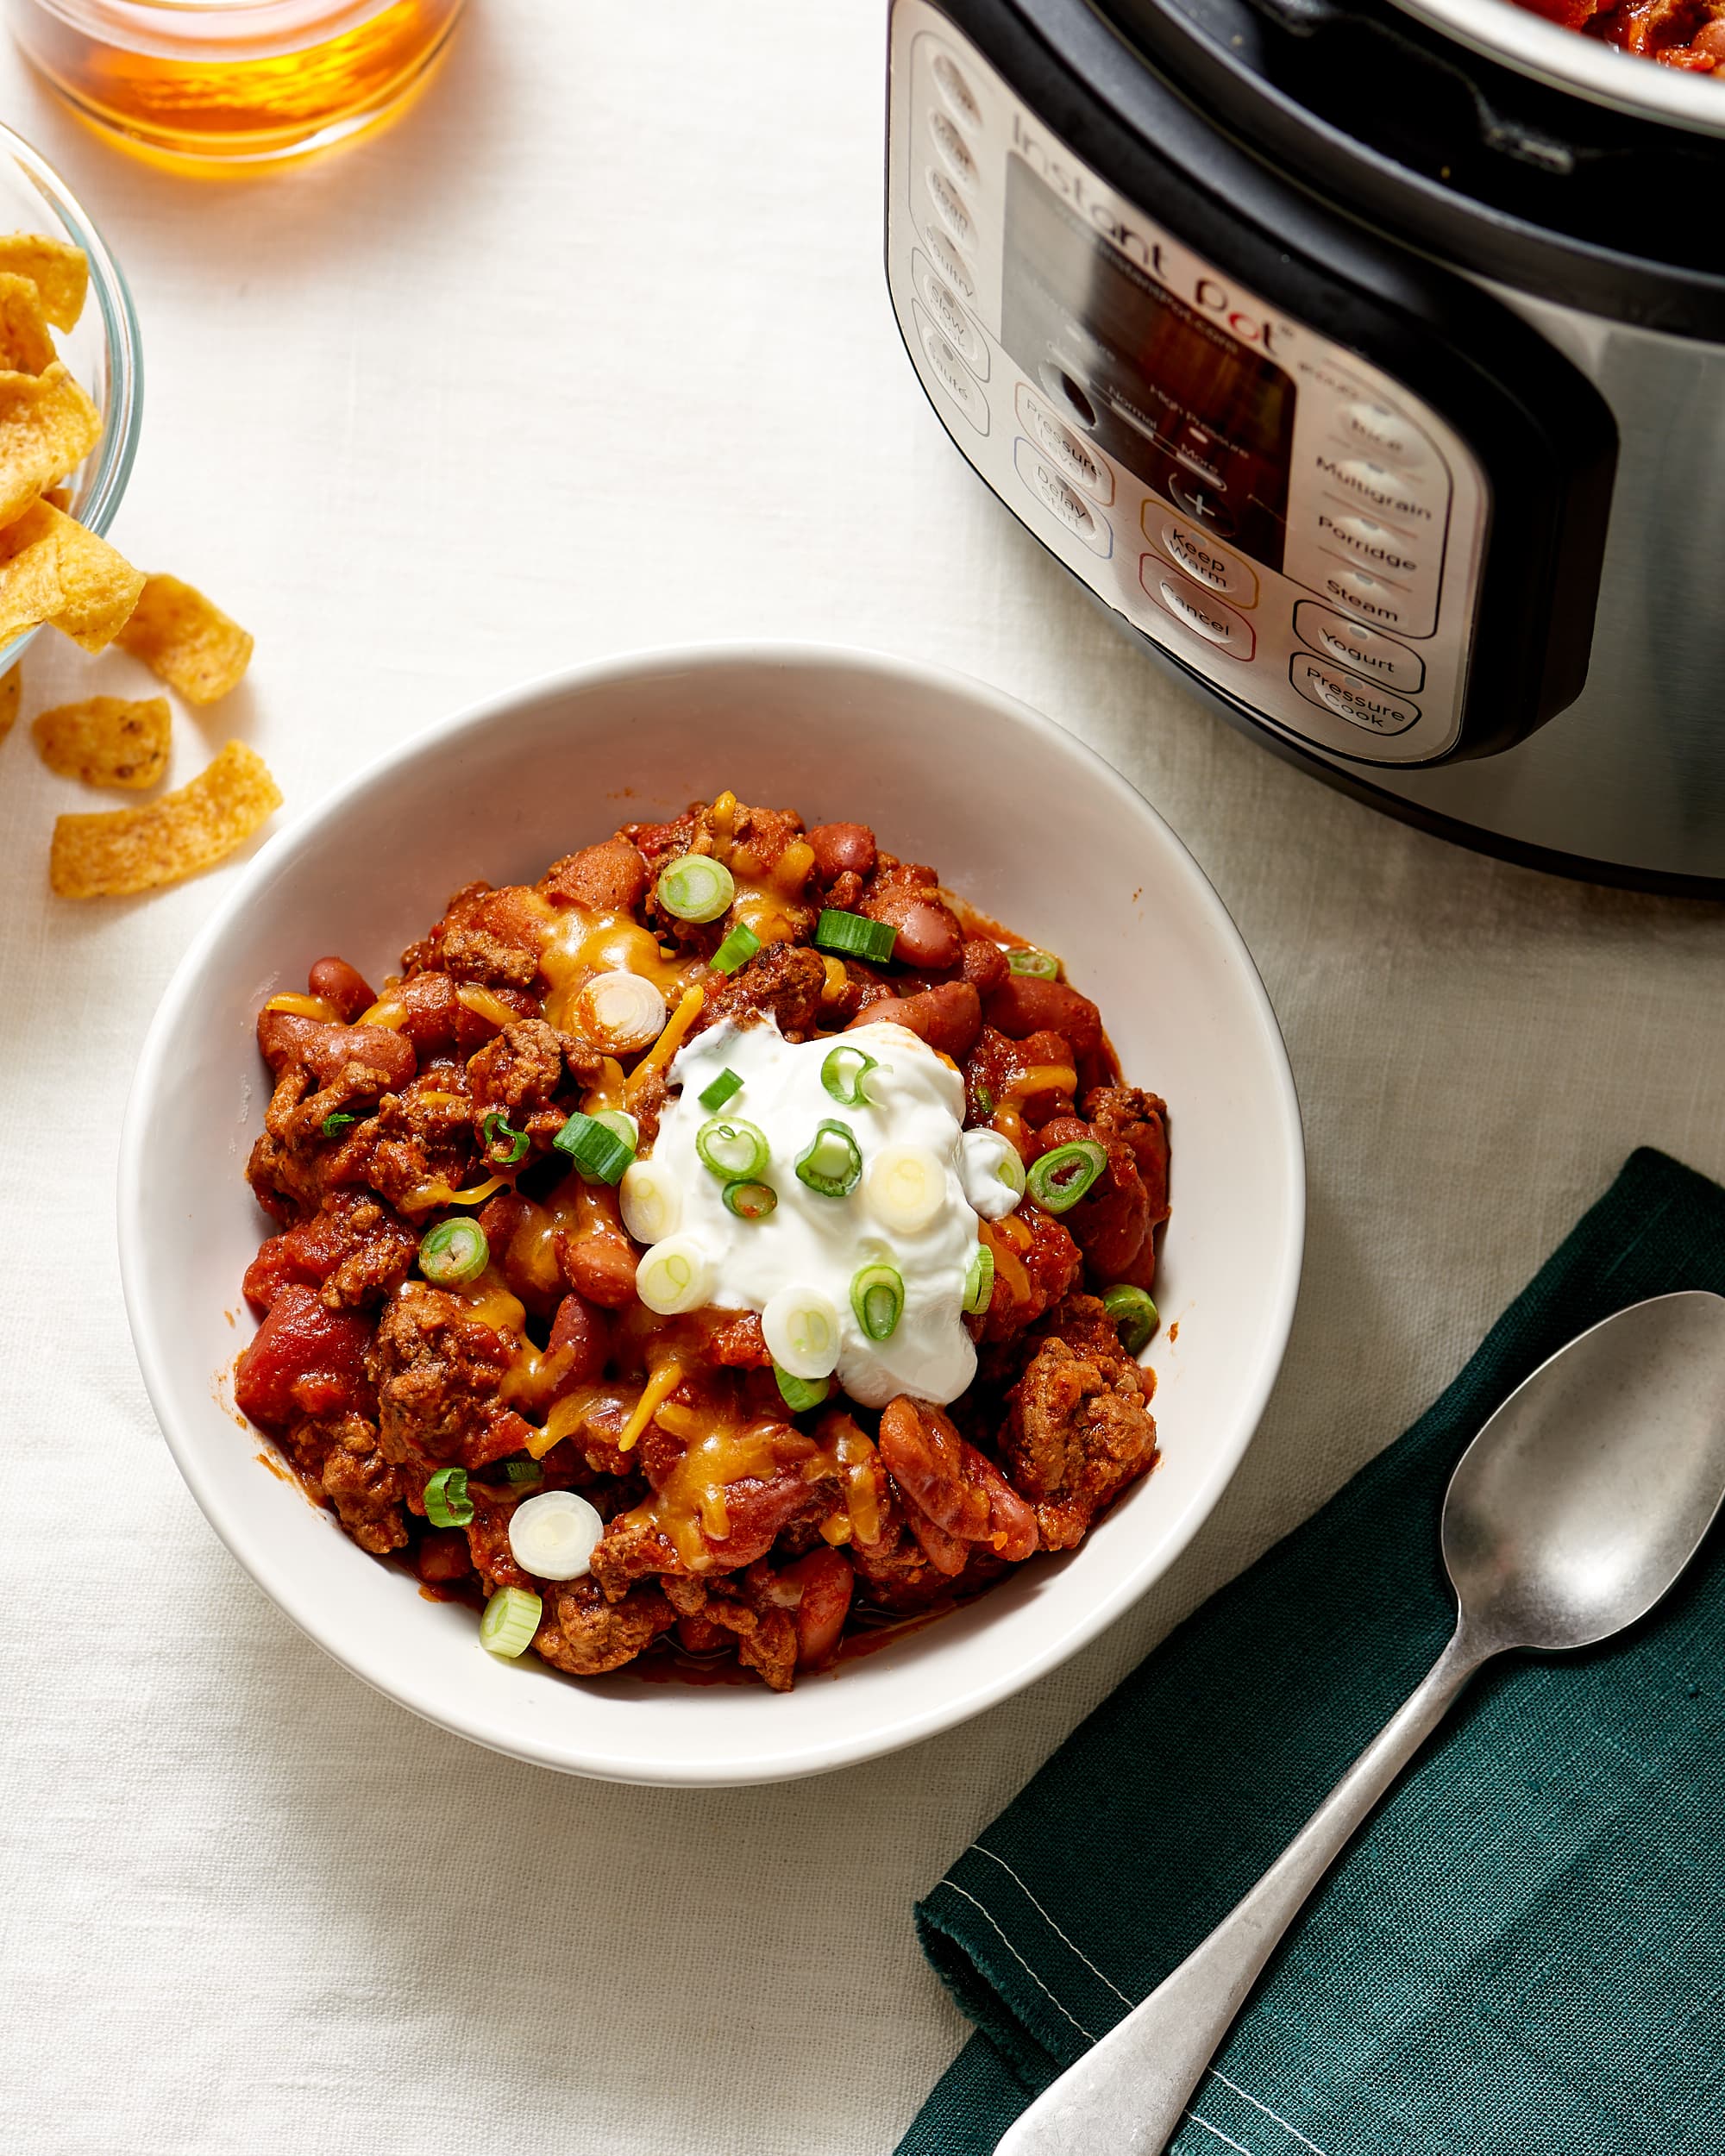 The Best Instant Pot Chili